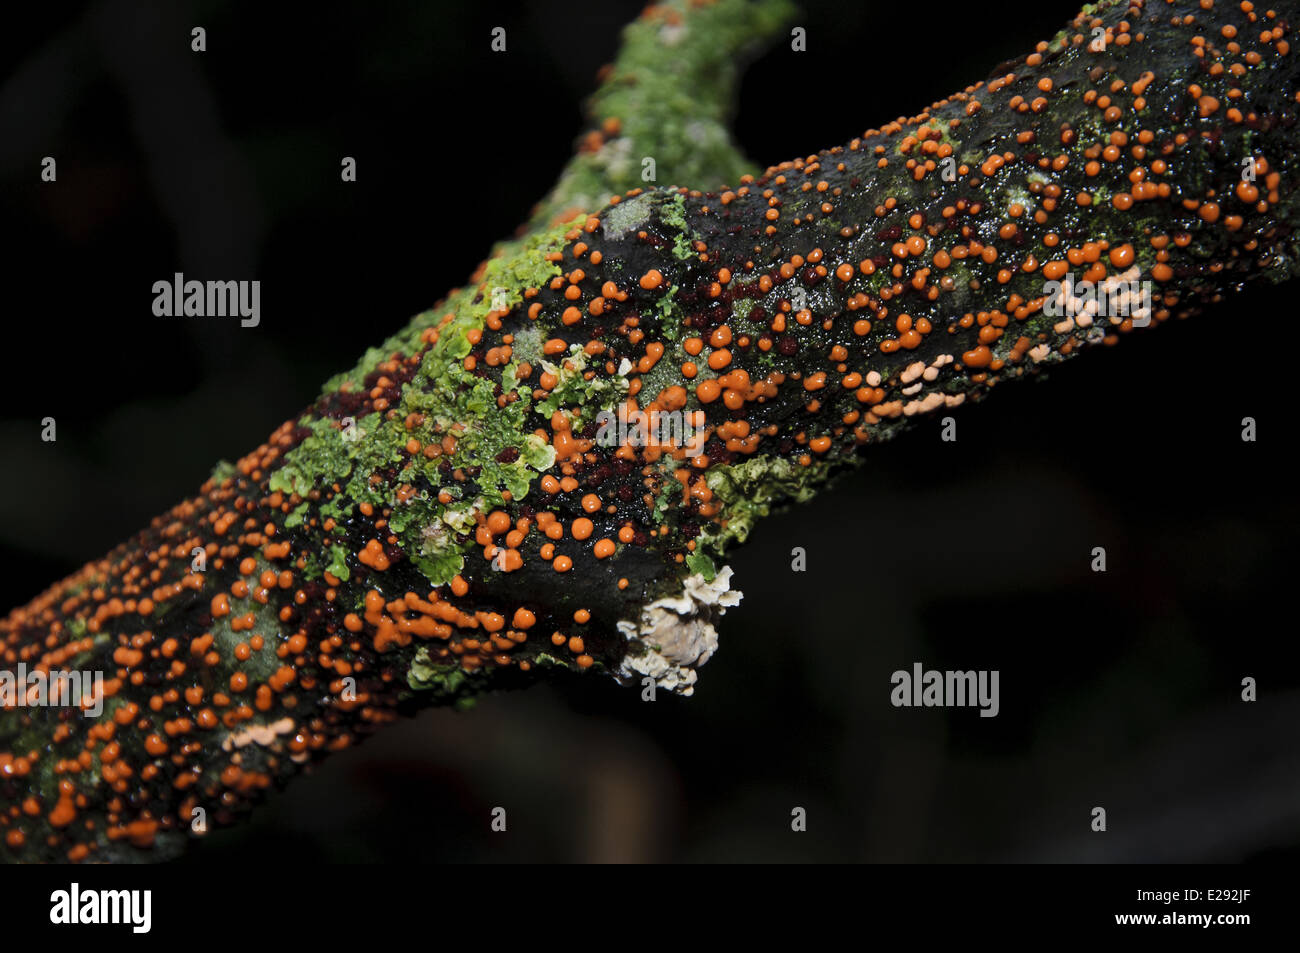 Coral Spot Fungus (Nectria cinnabarina) fruiting bodies, growing on dead branch, Aysgarth, Yorkshire Dales N.P., North Yorkshire, England, December Stock Photo